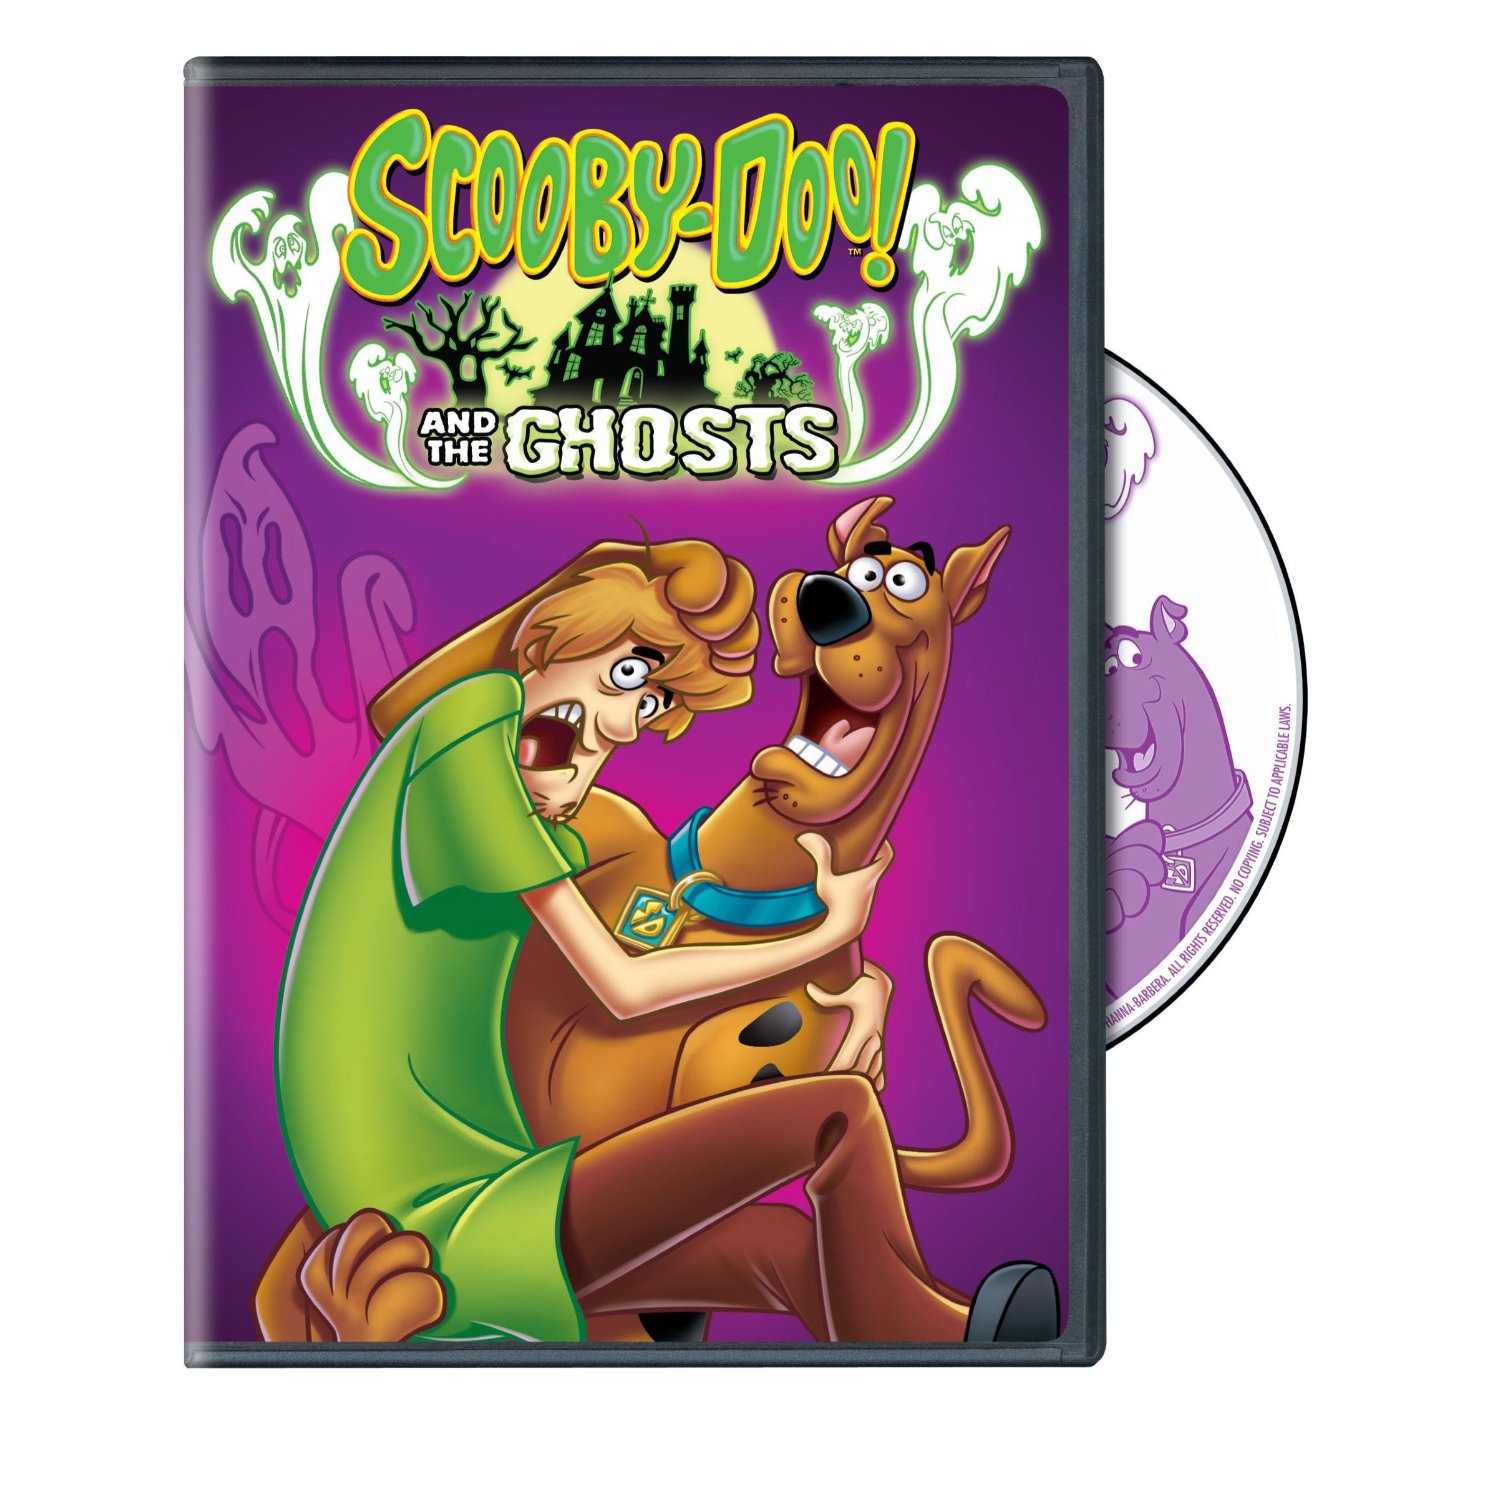 Scooby Doo and the Ghosts